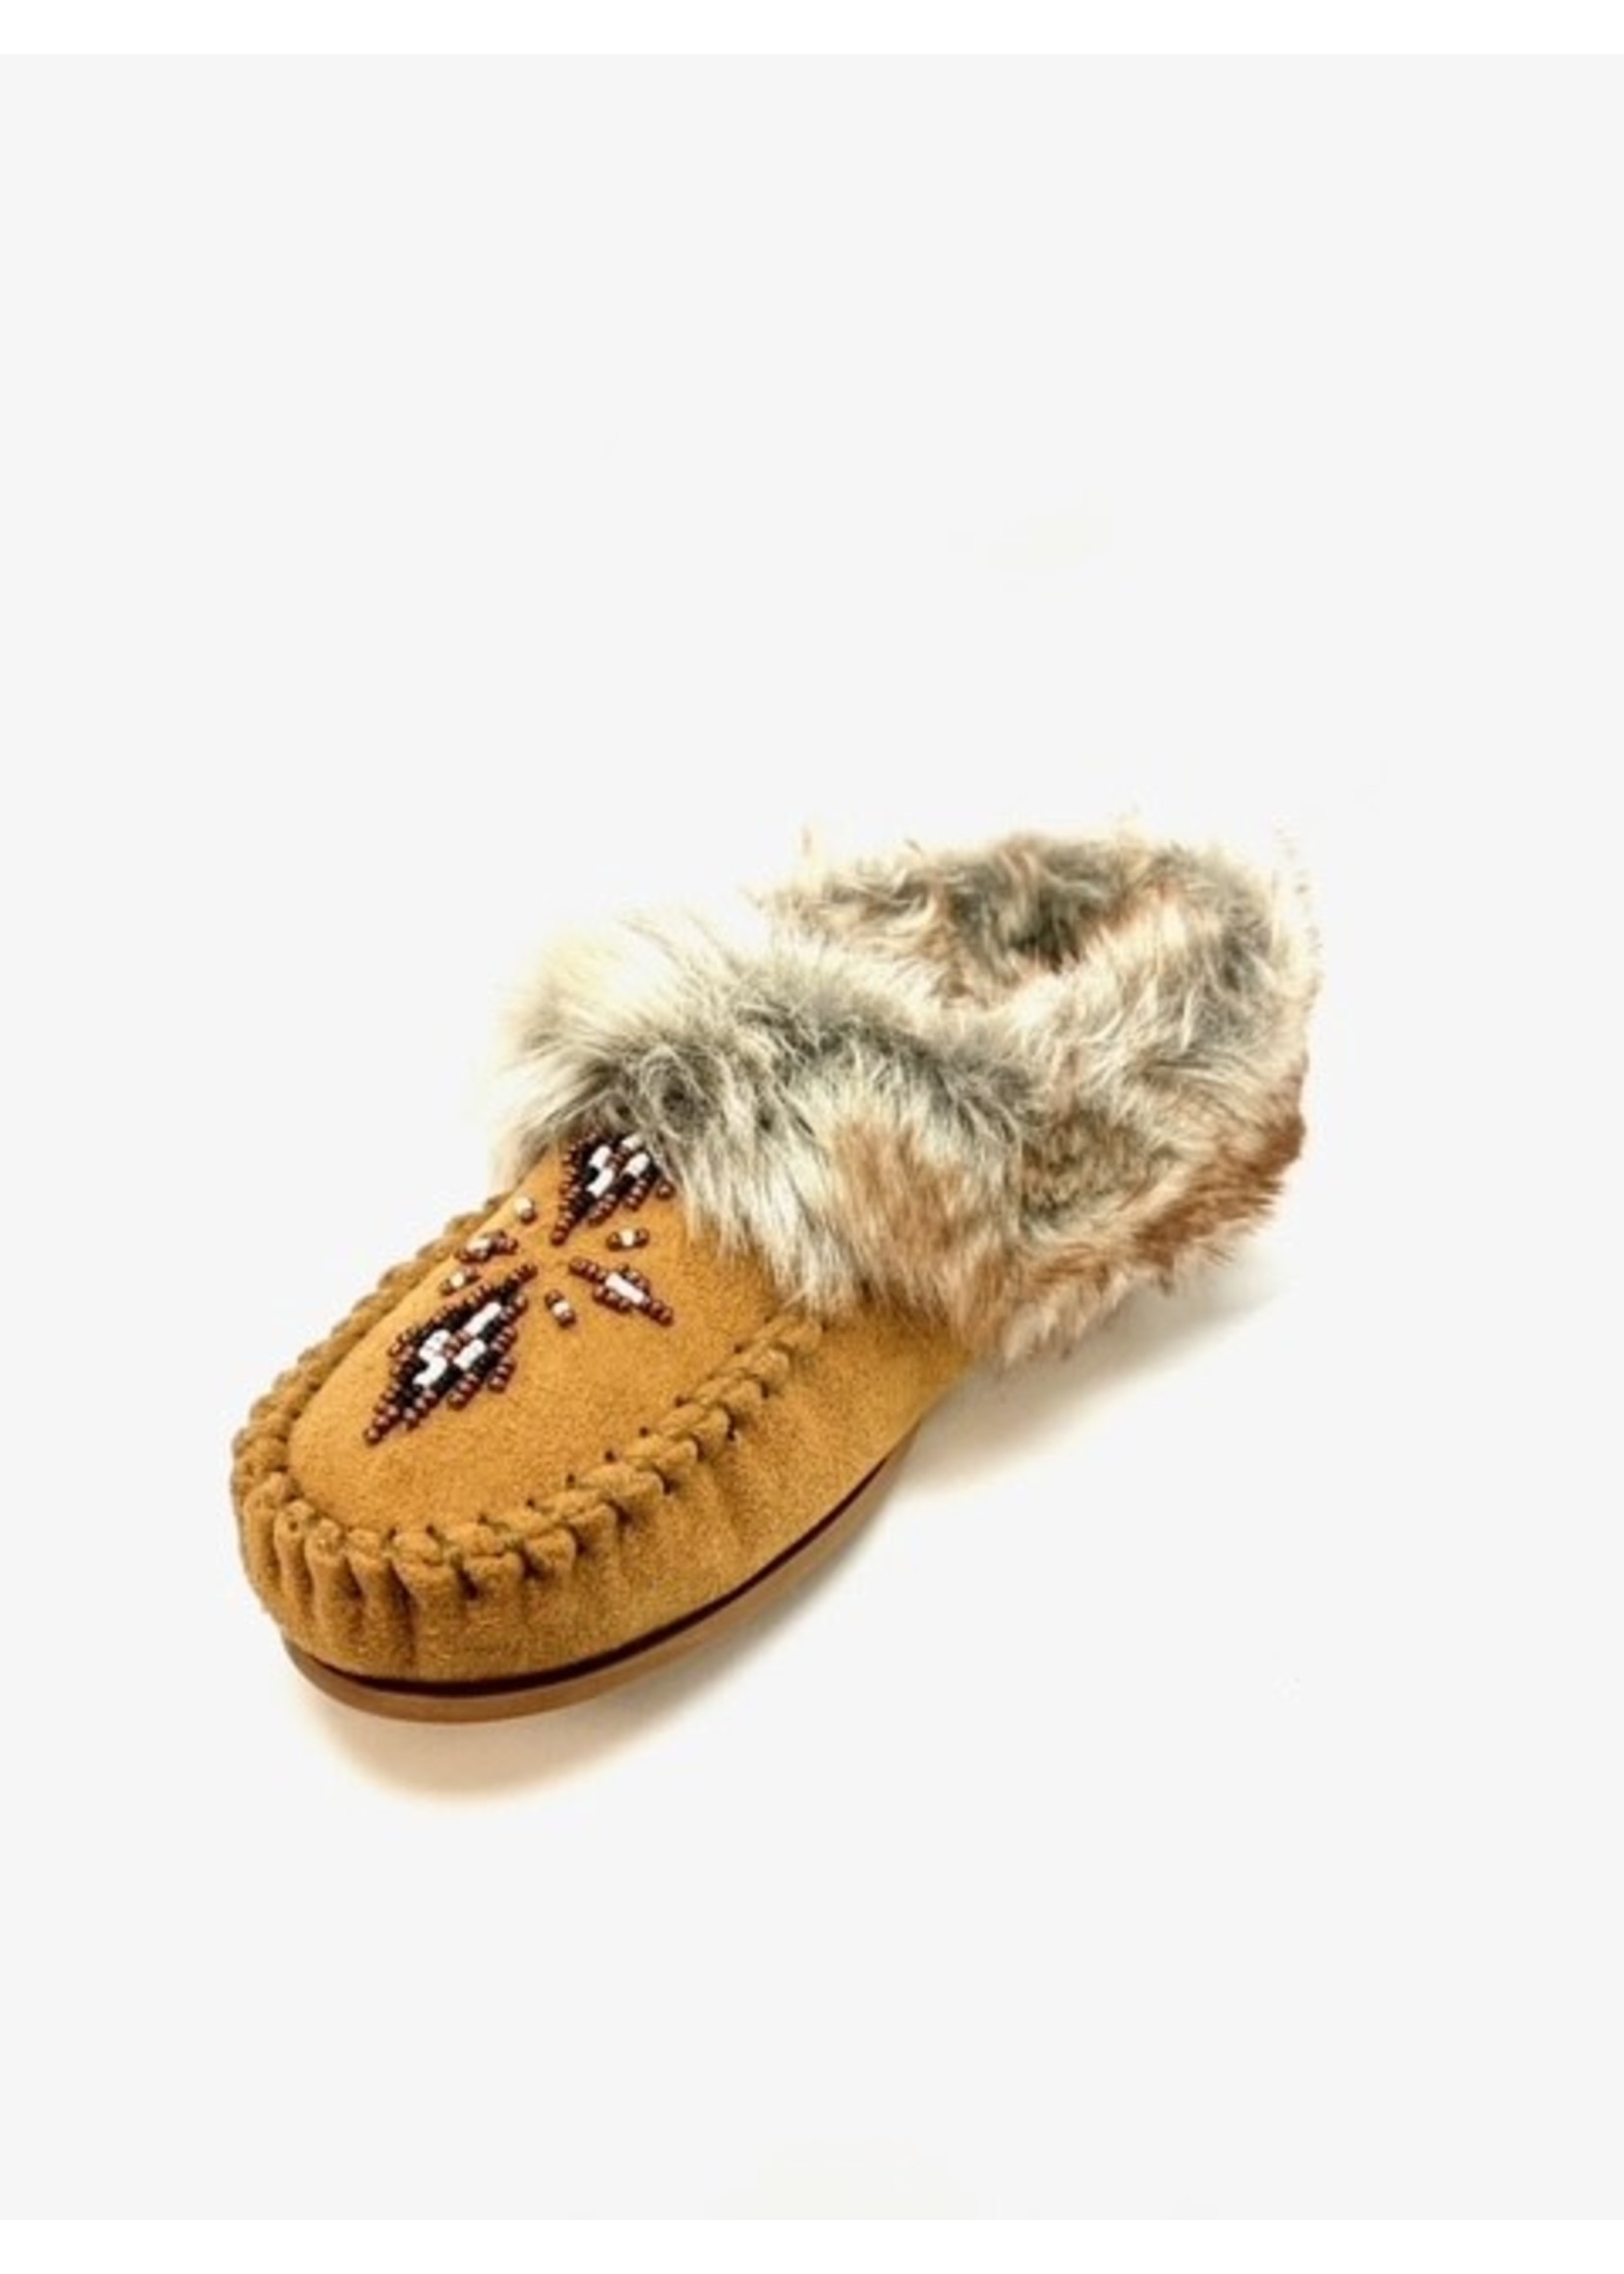 Frontier North ladies slippers, three colors available